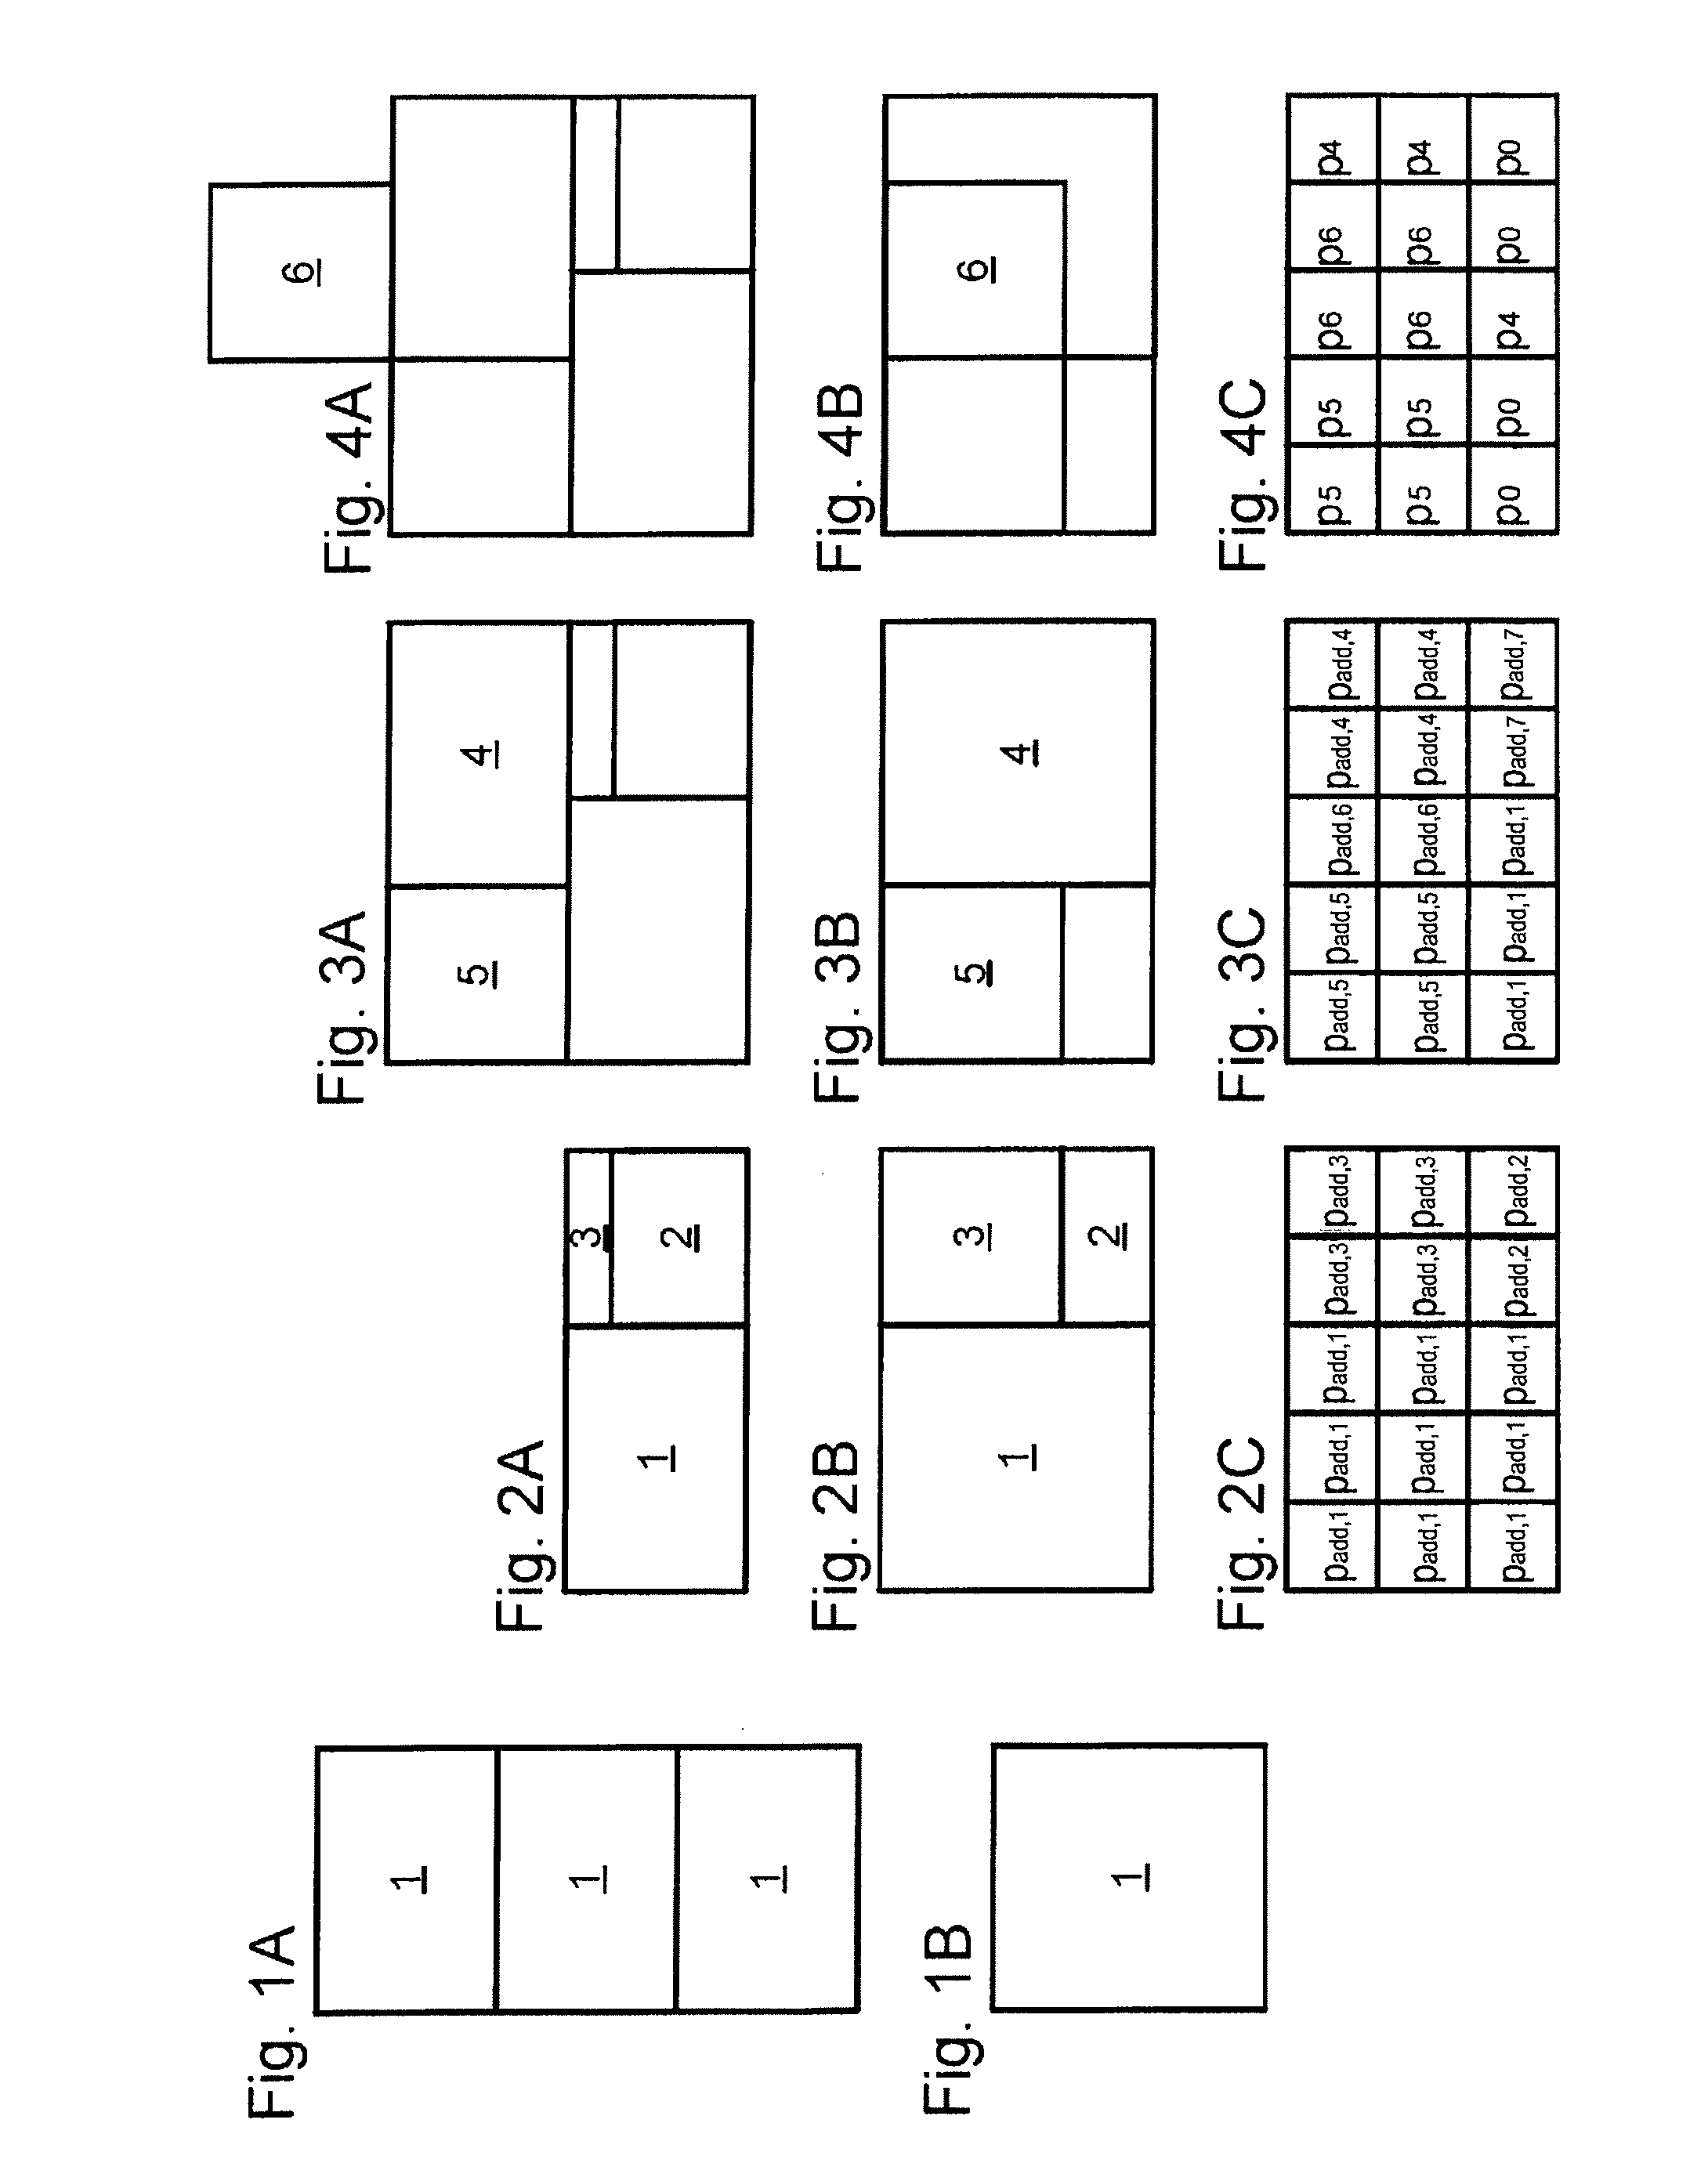 Computerized method for loading a load carrier with packages